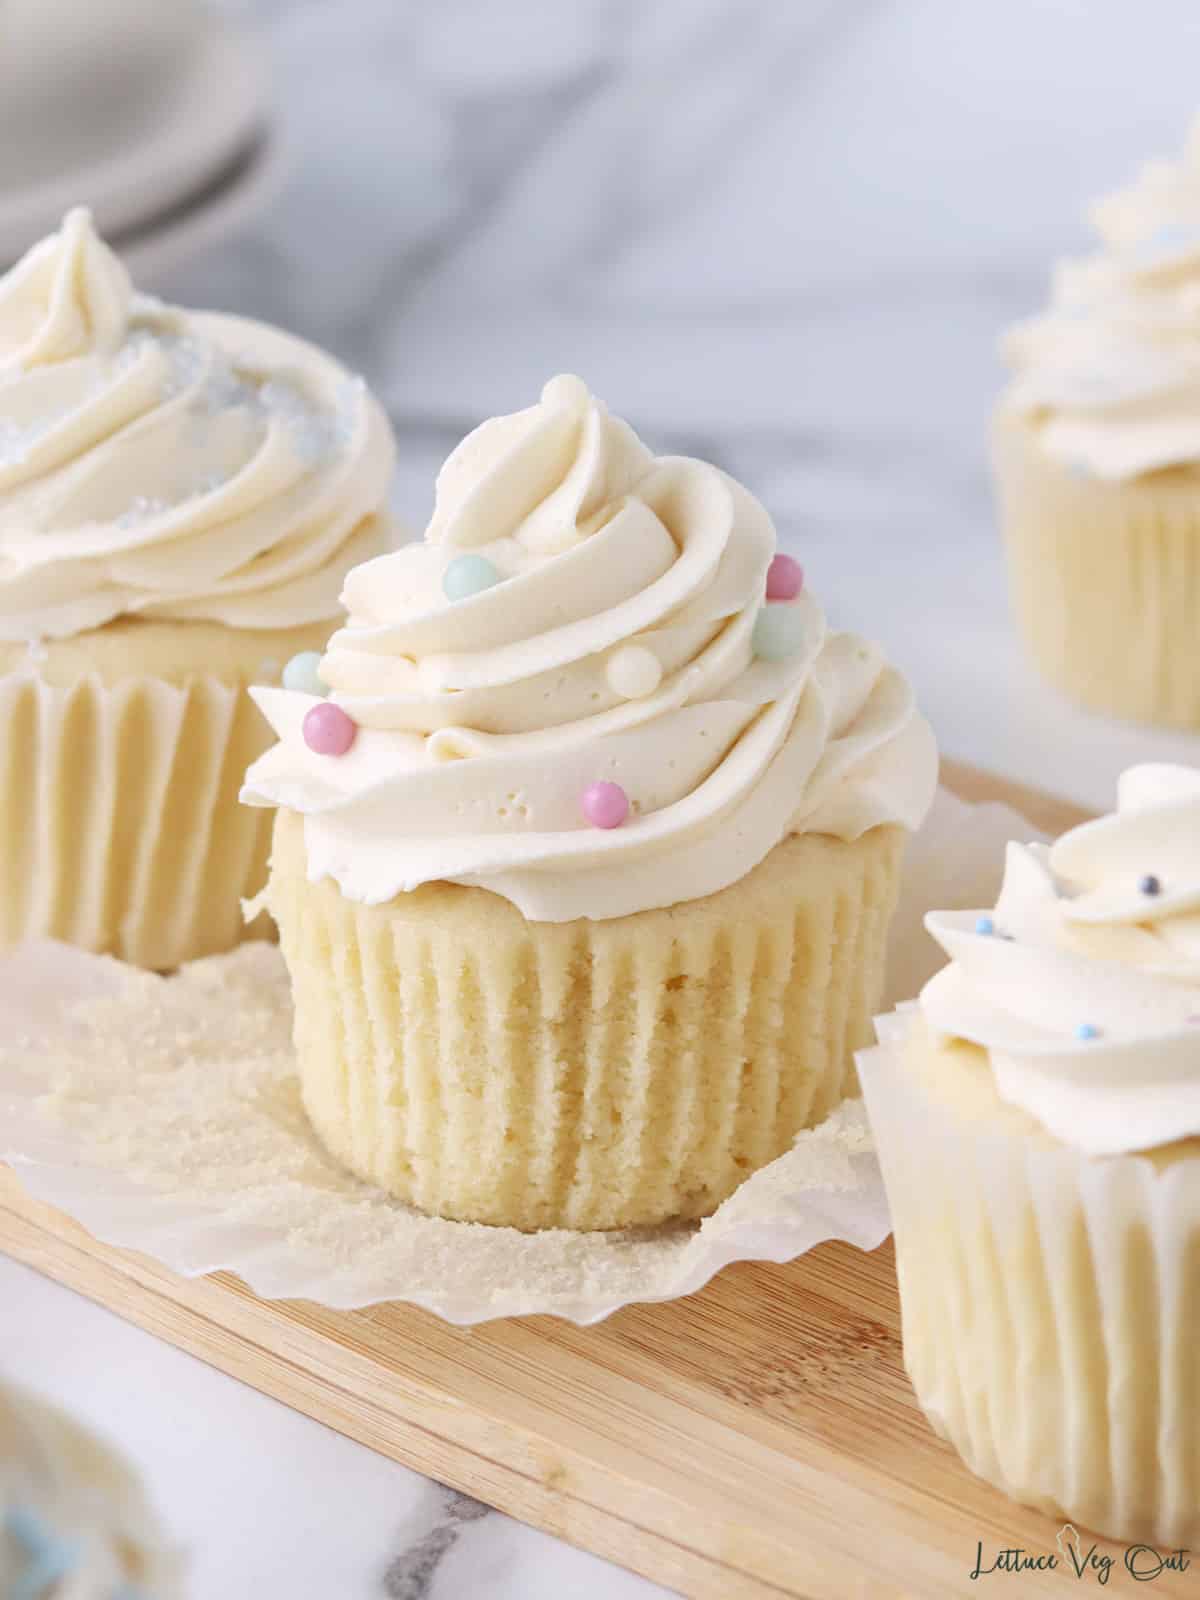 Close up of a vanilla cupcake topped with vanilla buttercream and large pale sprinkles, surrounded by other cupcakes.